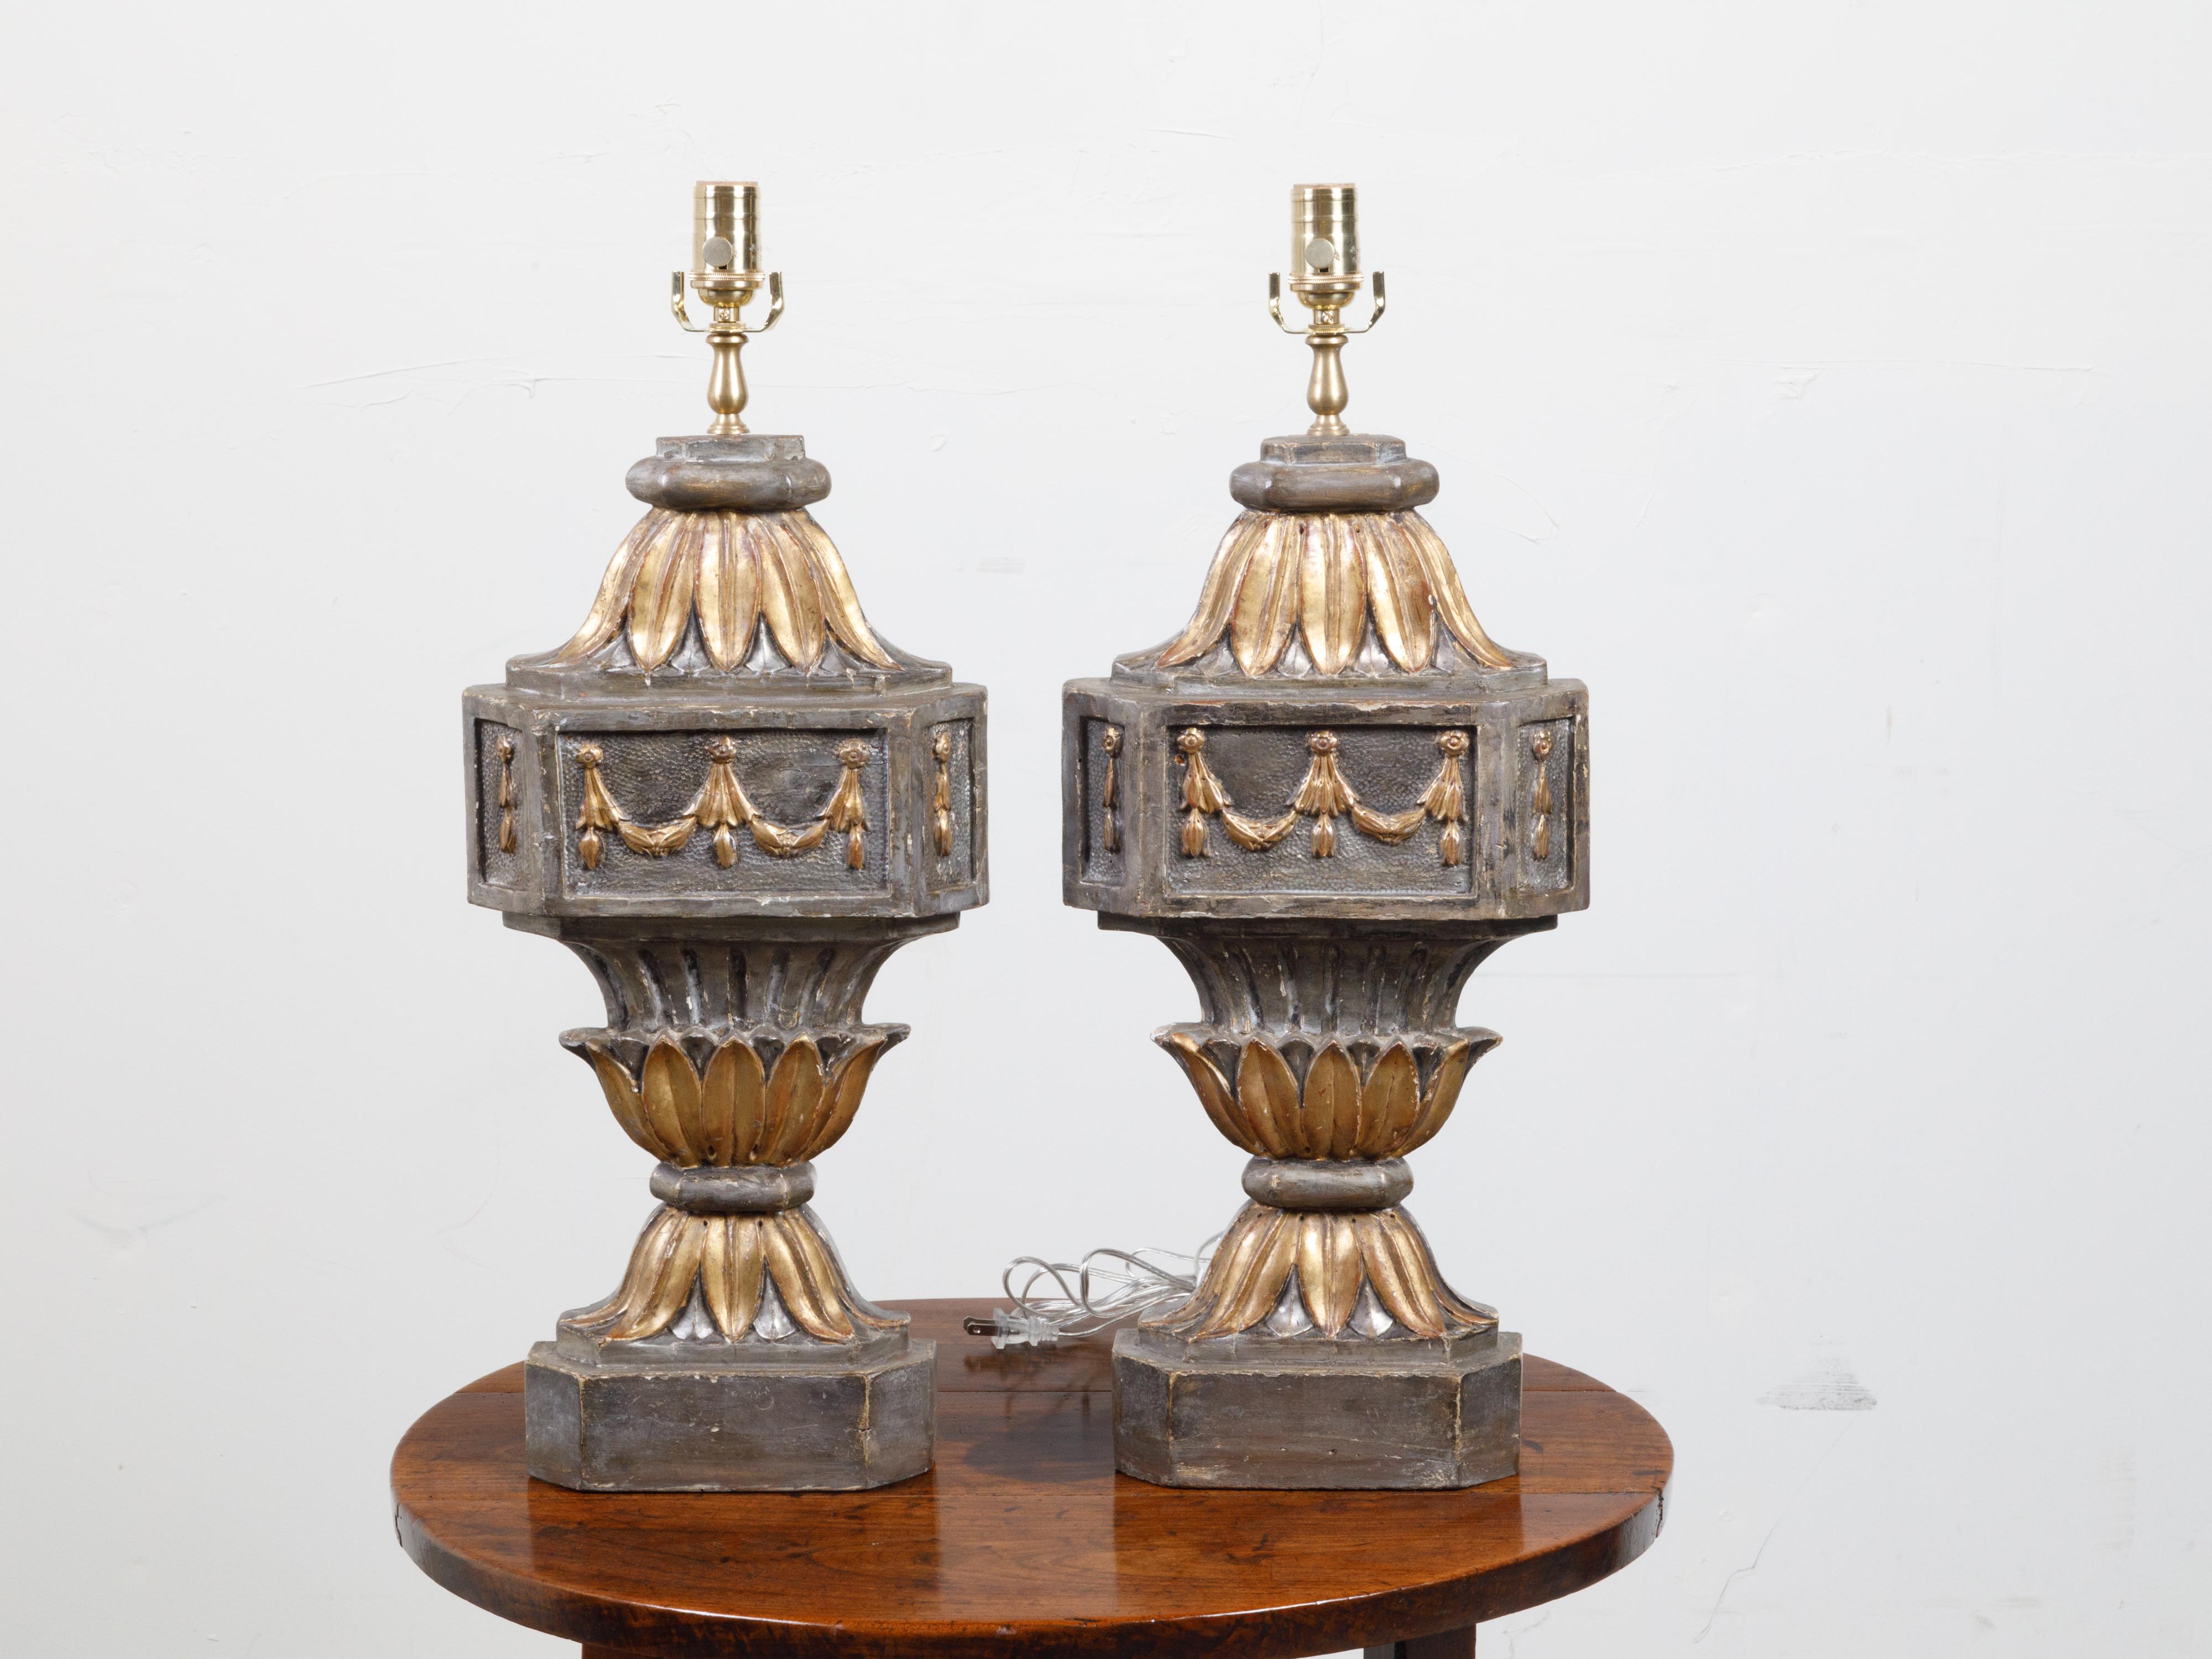 A pair of French carved and gilt wooden fragments from the 18th century, made into table lamps. Created in France during the 18th century, each of this pair of architectural fragments was mounted into a table lamp wired for the US. Showcasing carved